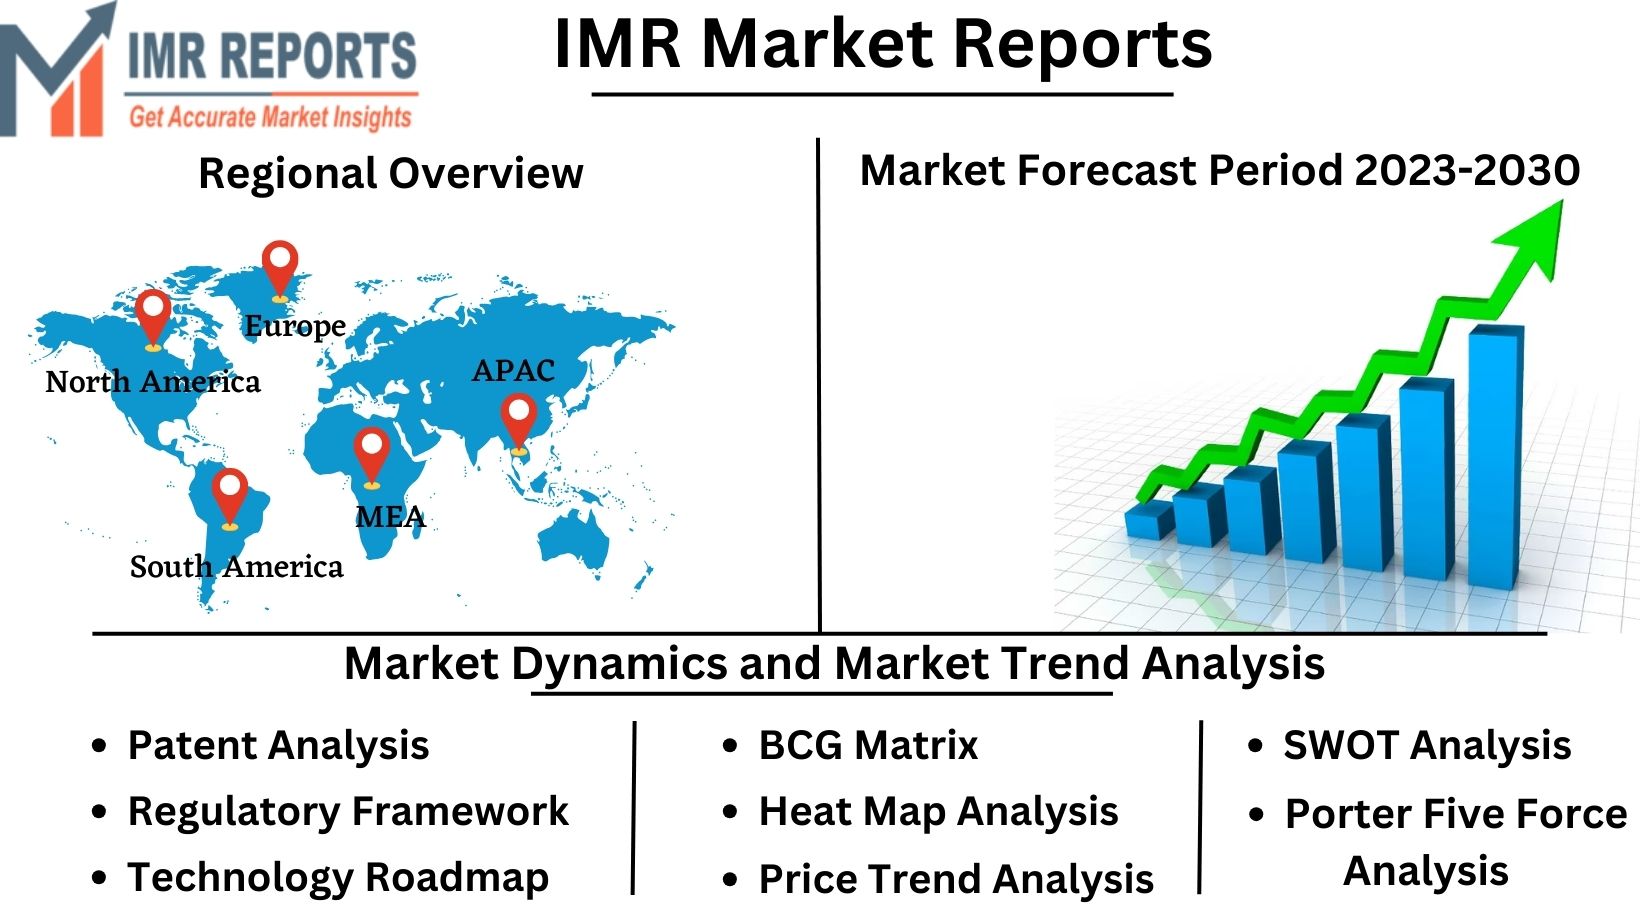 IMR_Market_Reports_(1)13